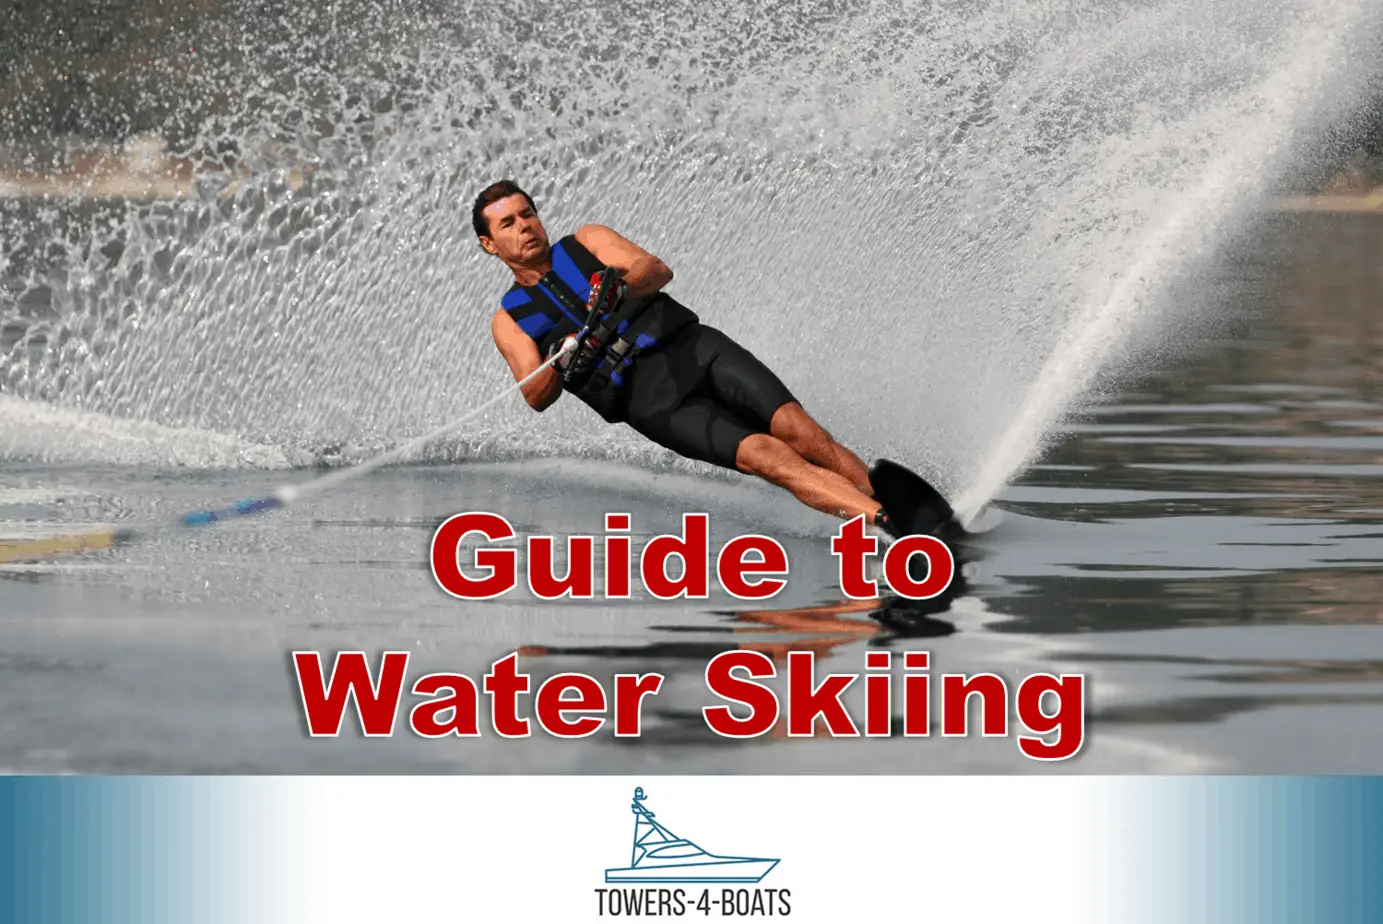 Complete Guide to Water Skiing Equipment